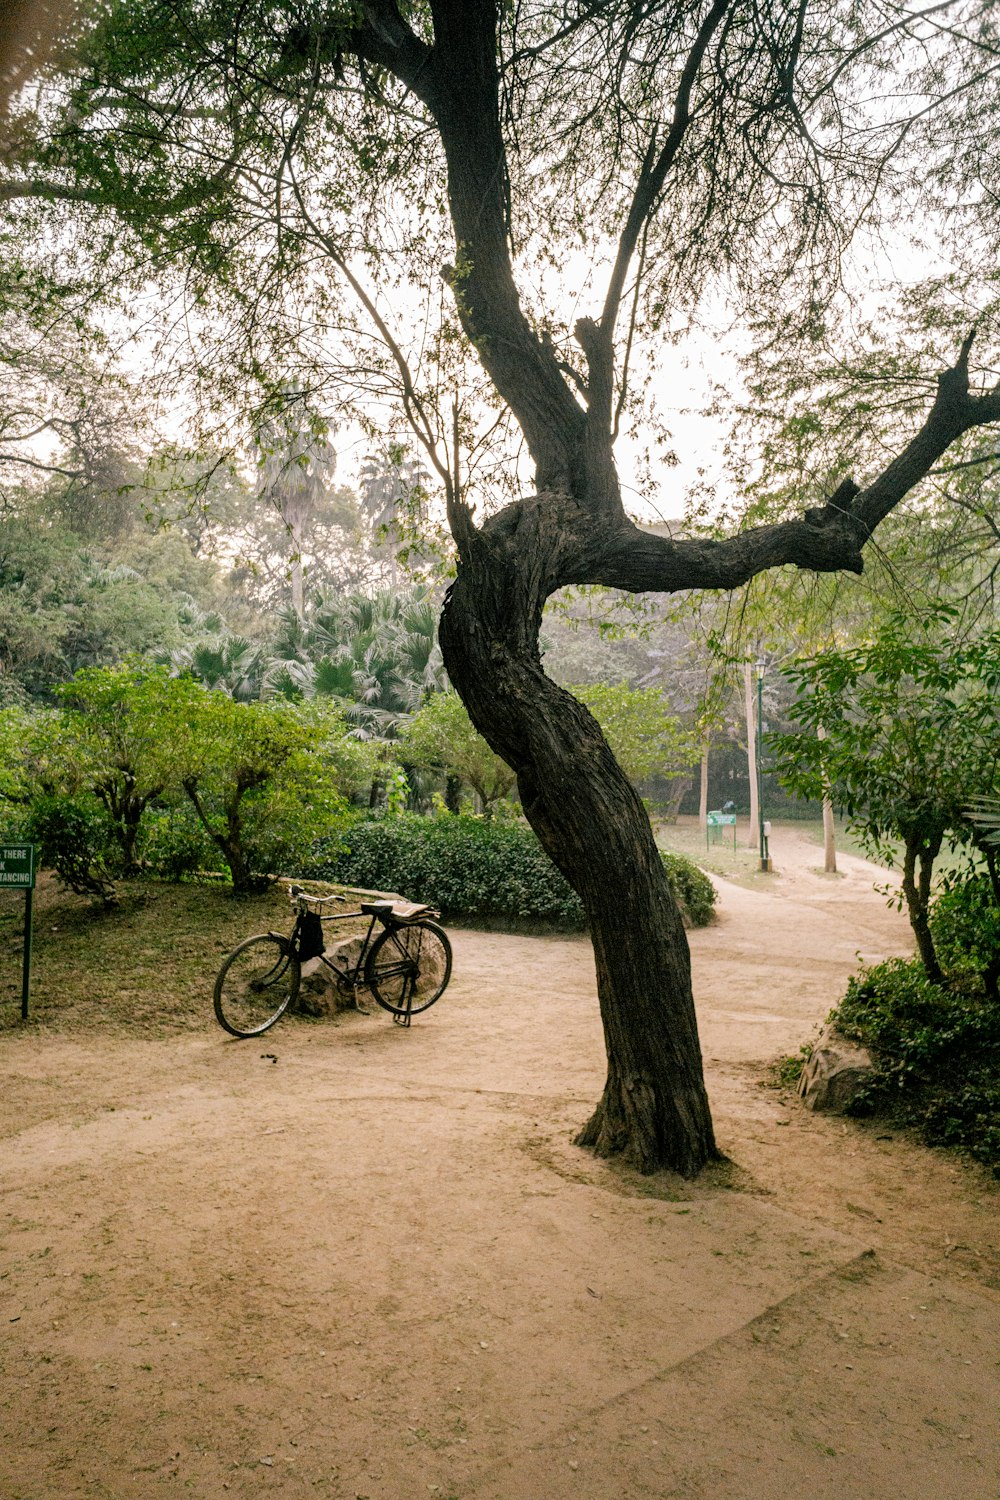 a bike parked next to a tree in a park